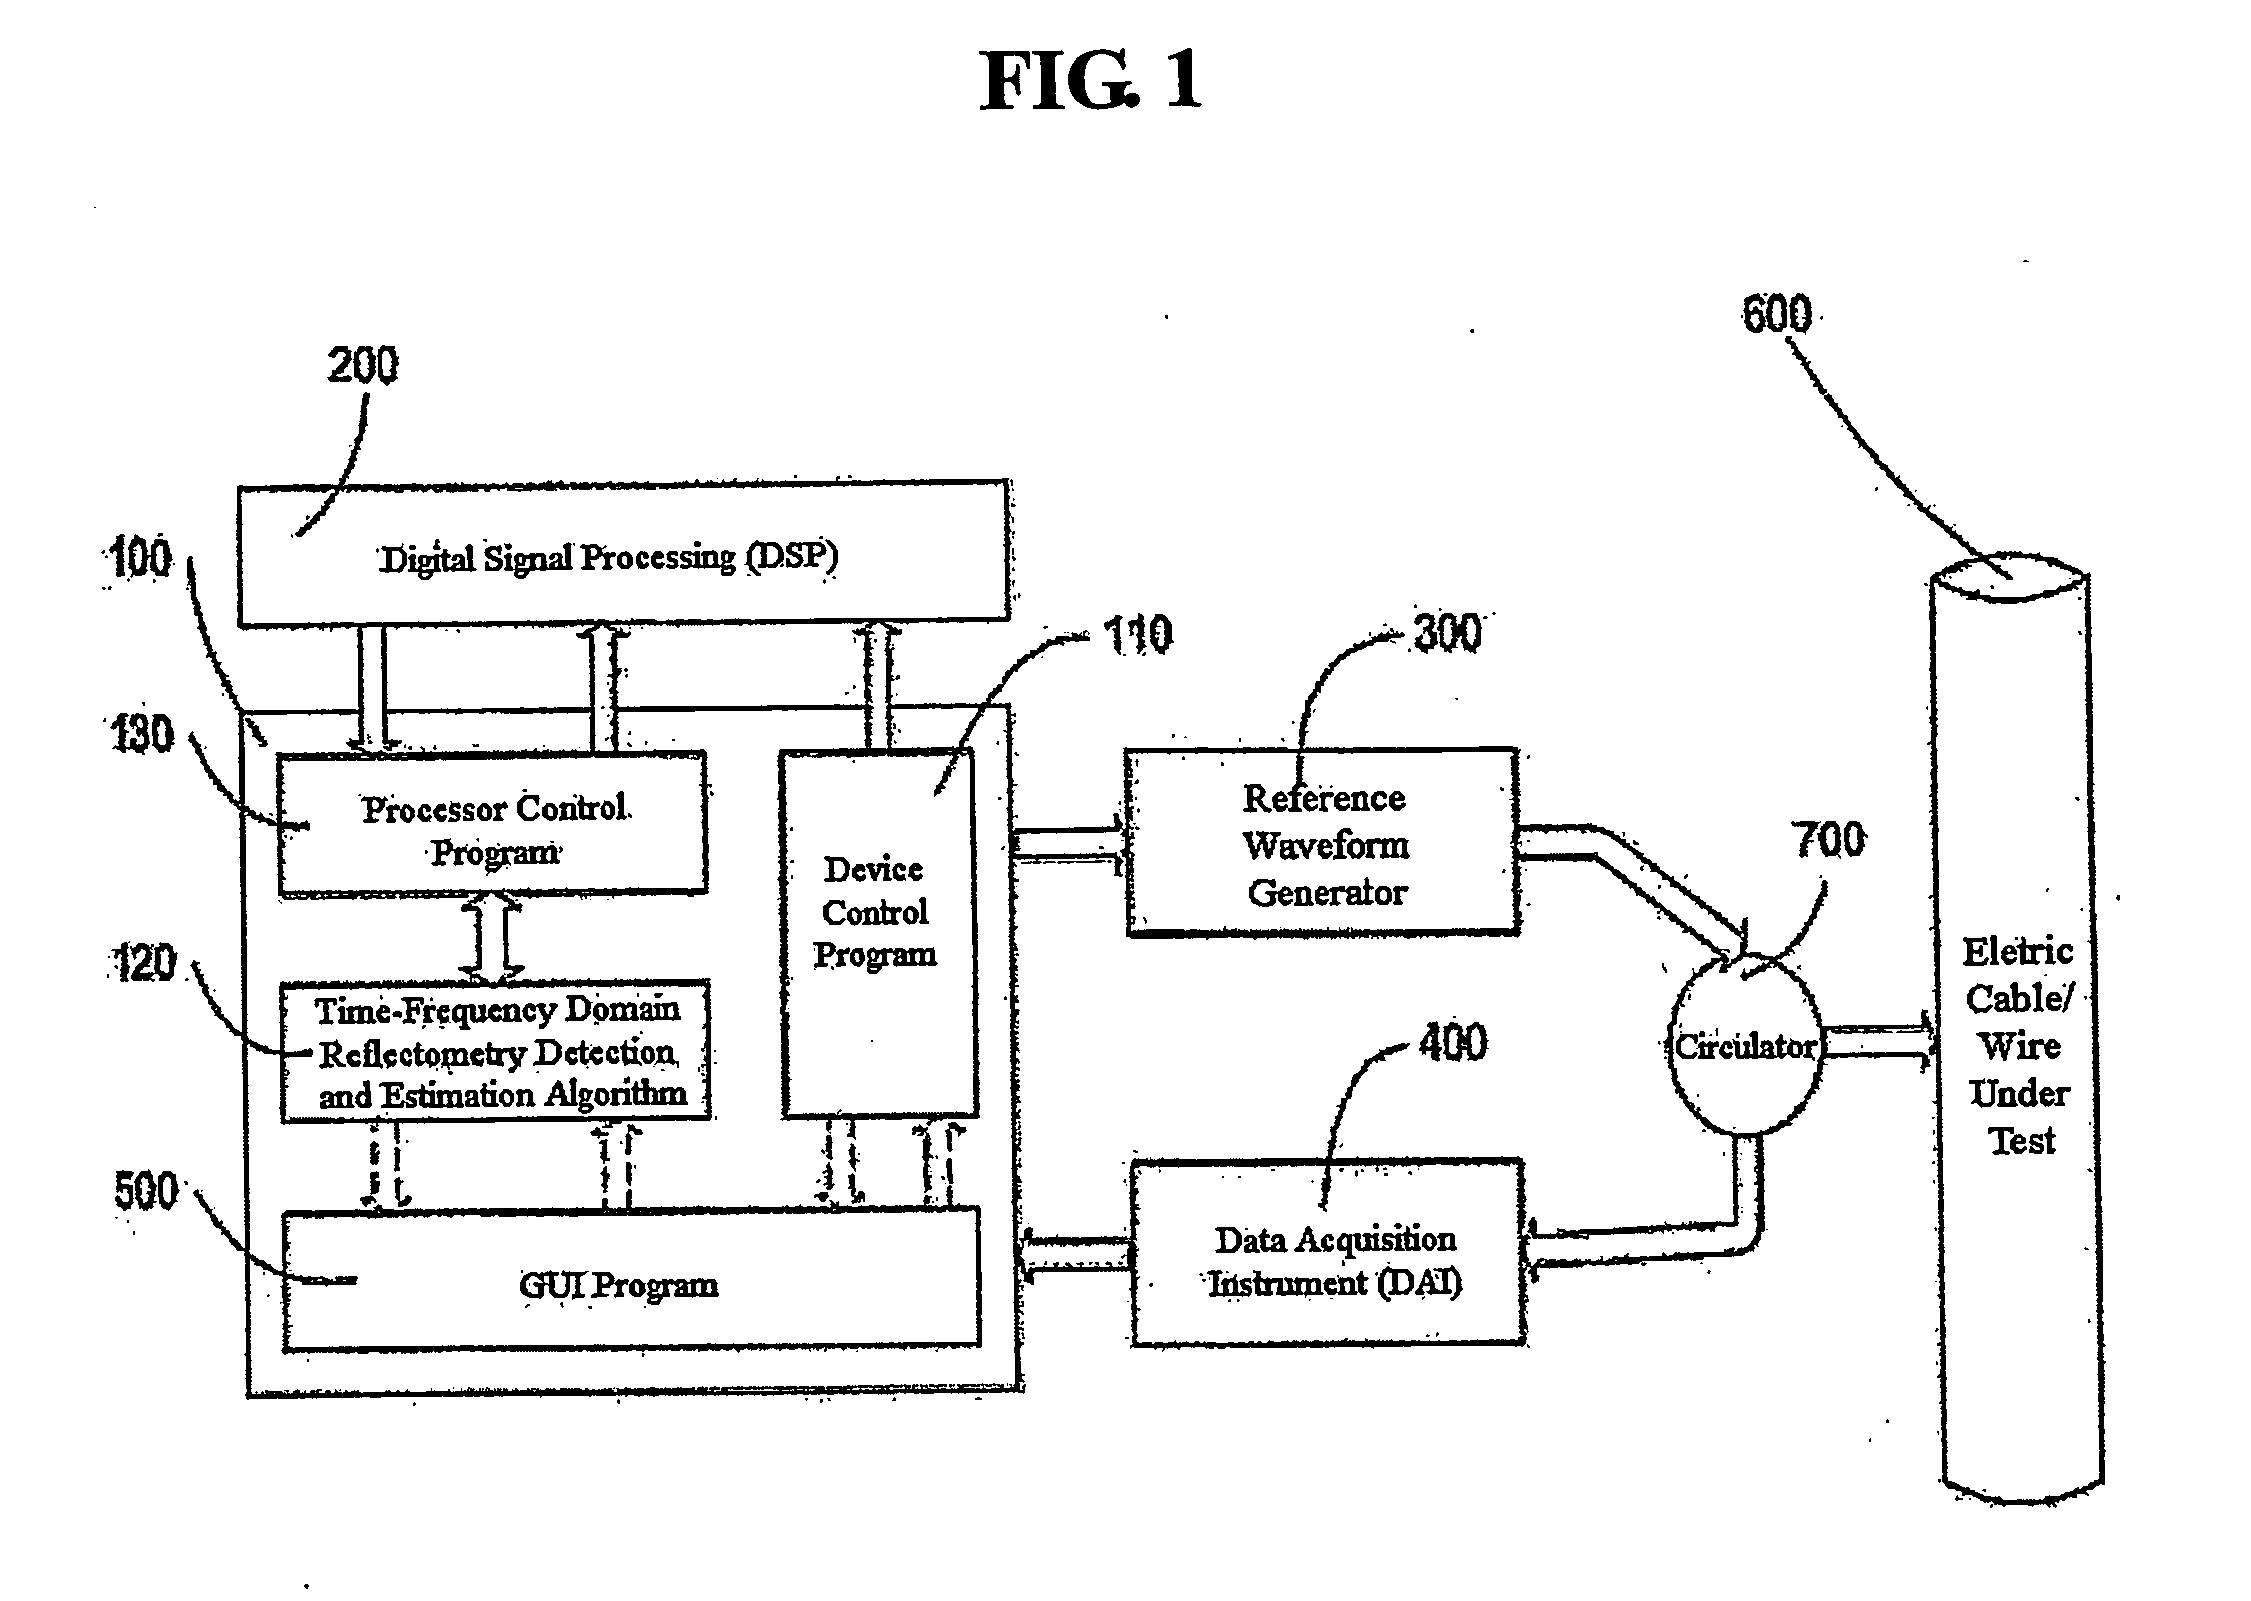 Time-frequency domain reflectometry apparatus and method